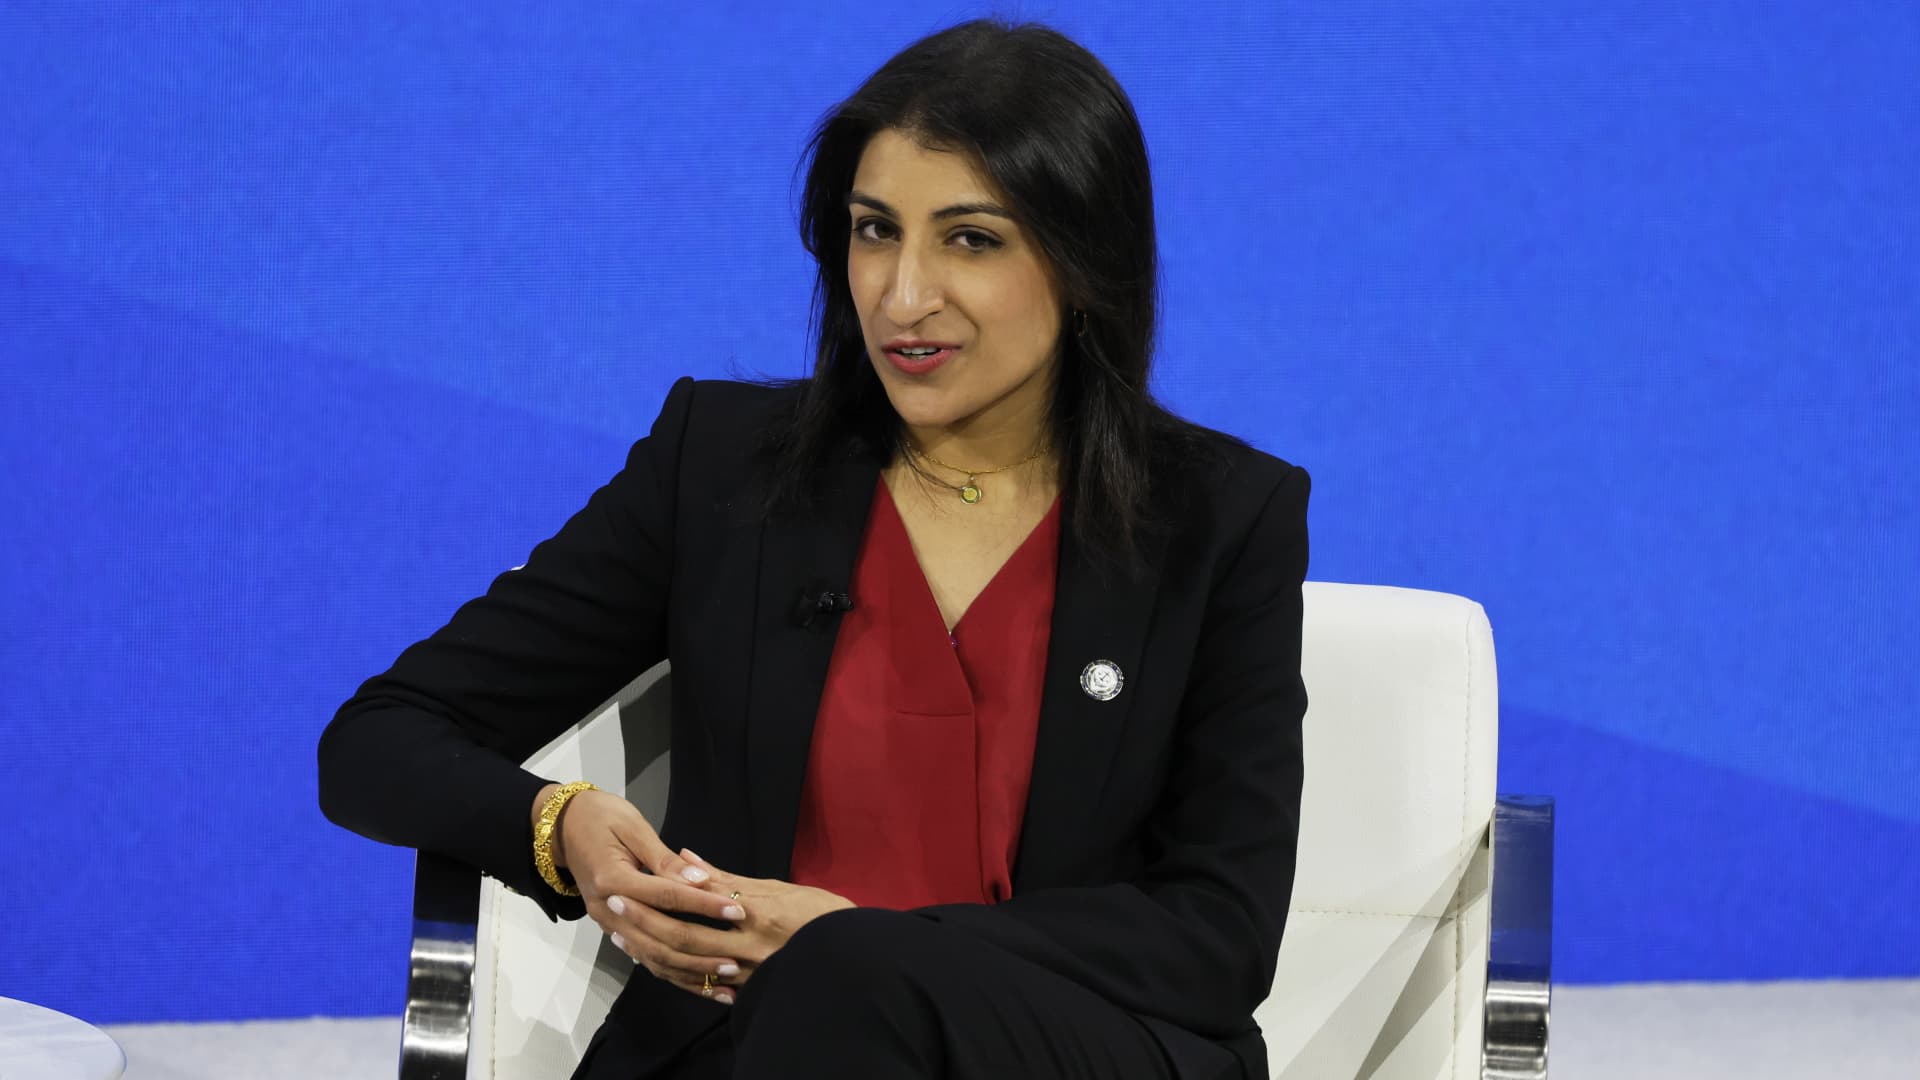 FTC chair Khan defends her tenure, doesn't subscribe to Amazon Prime